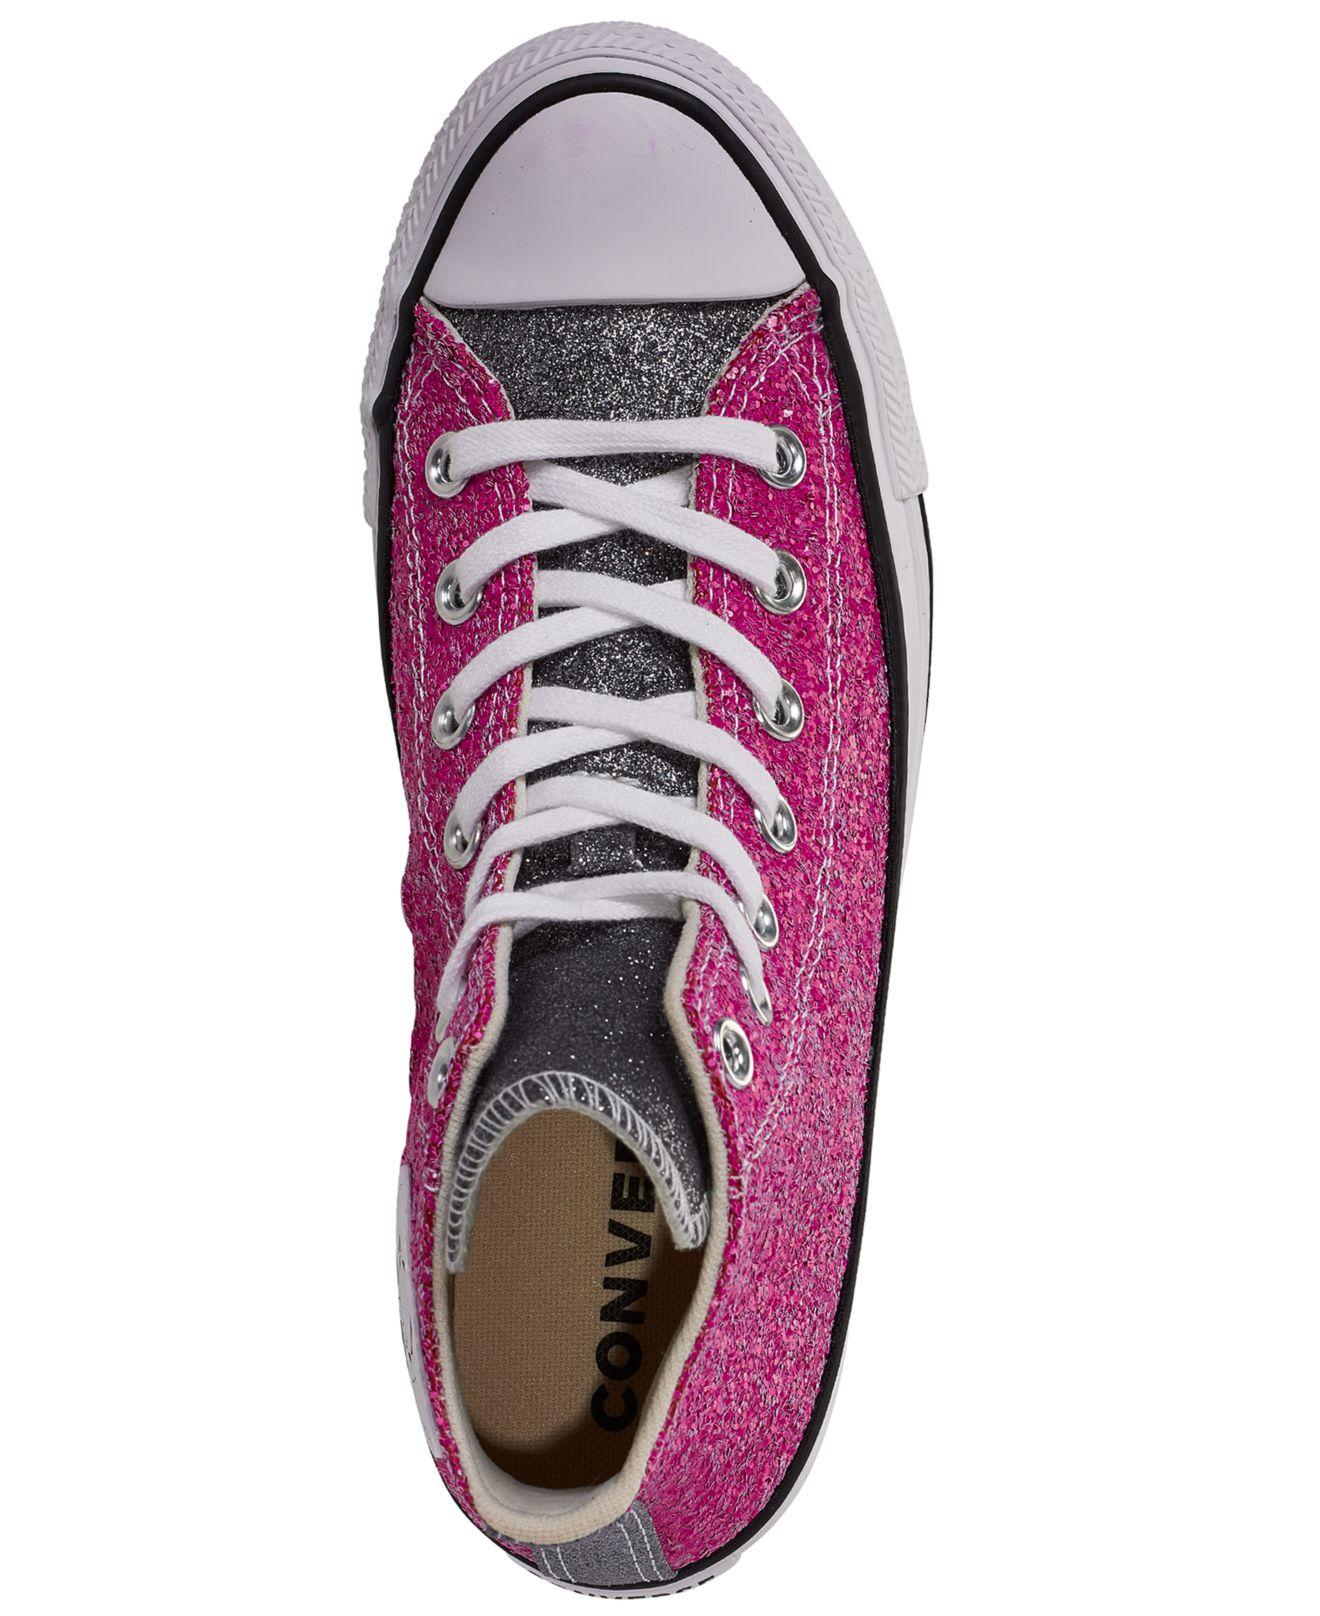 all star low leather dust pink stud,nalan.com.sg